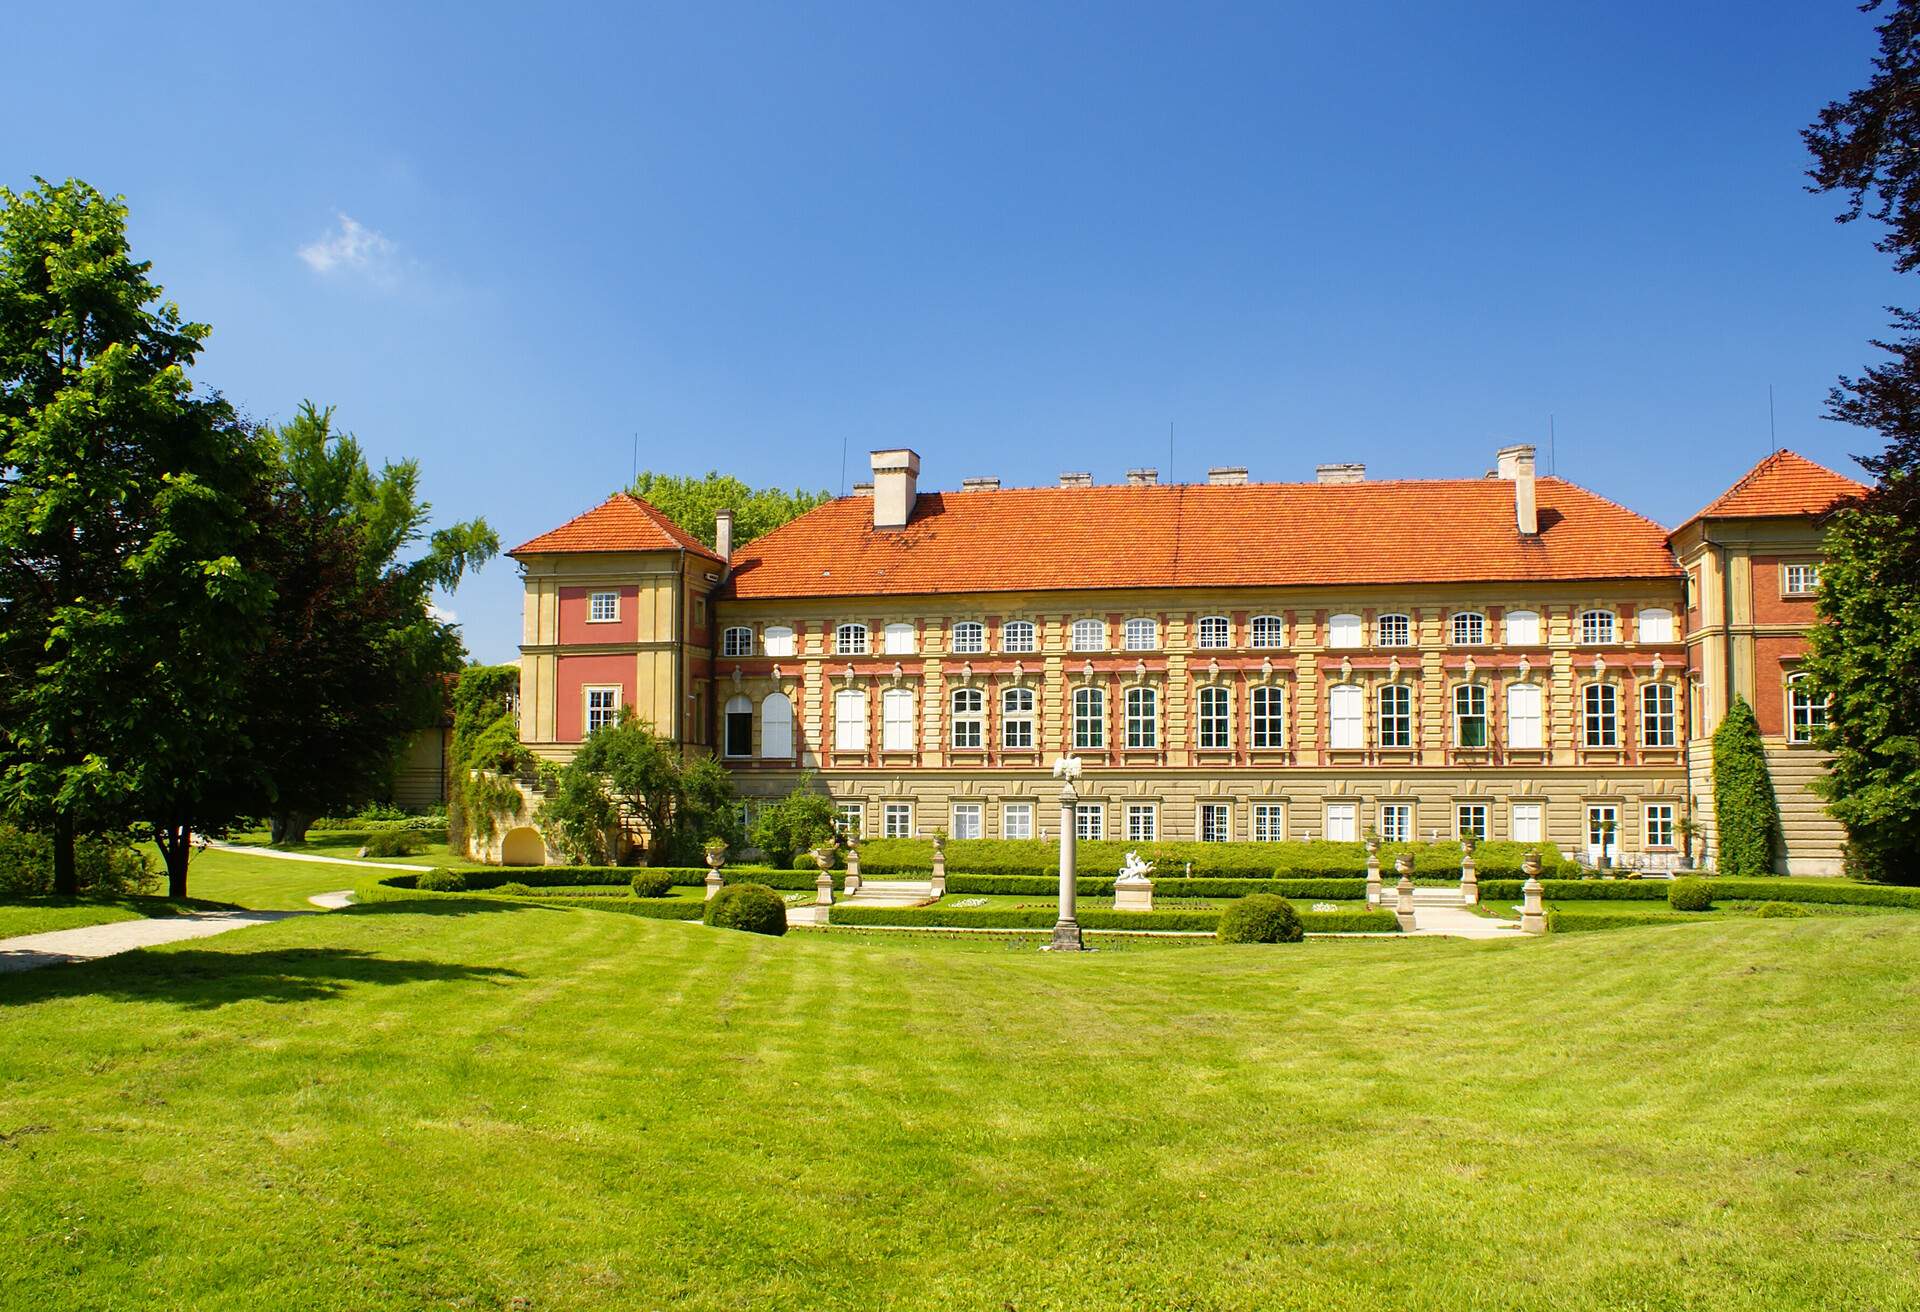 The site was originally occupied by a castle built by Stanisław Lubomirski in 1629–42.